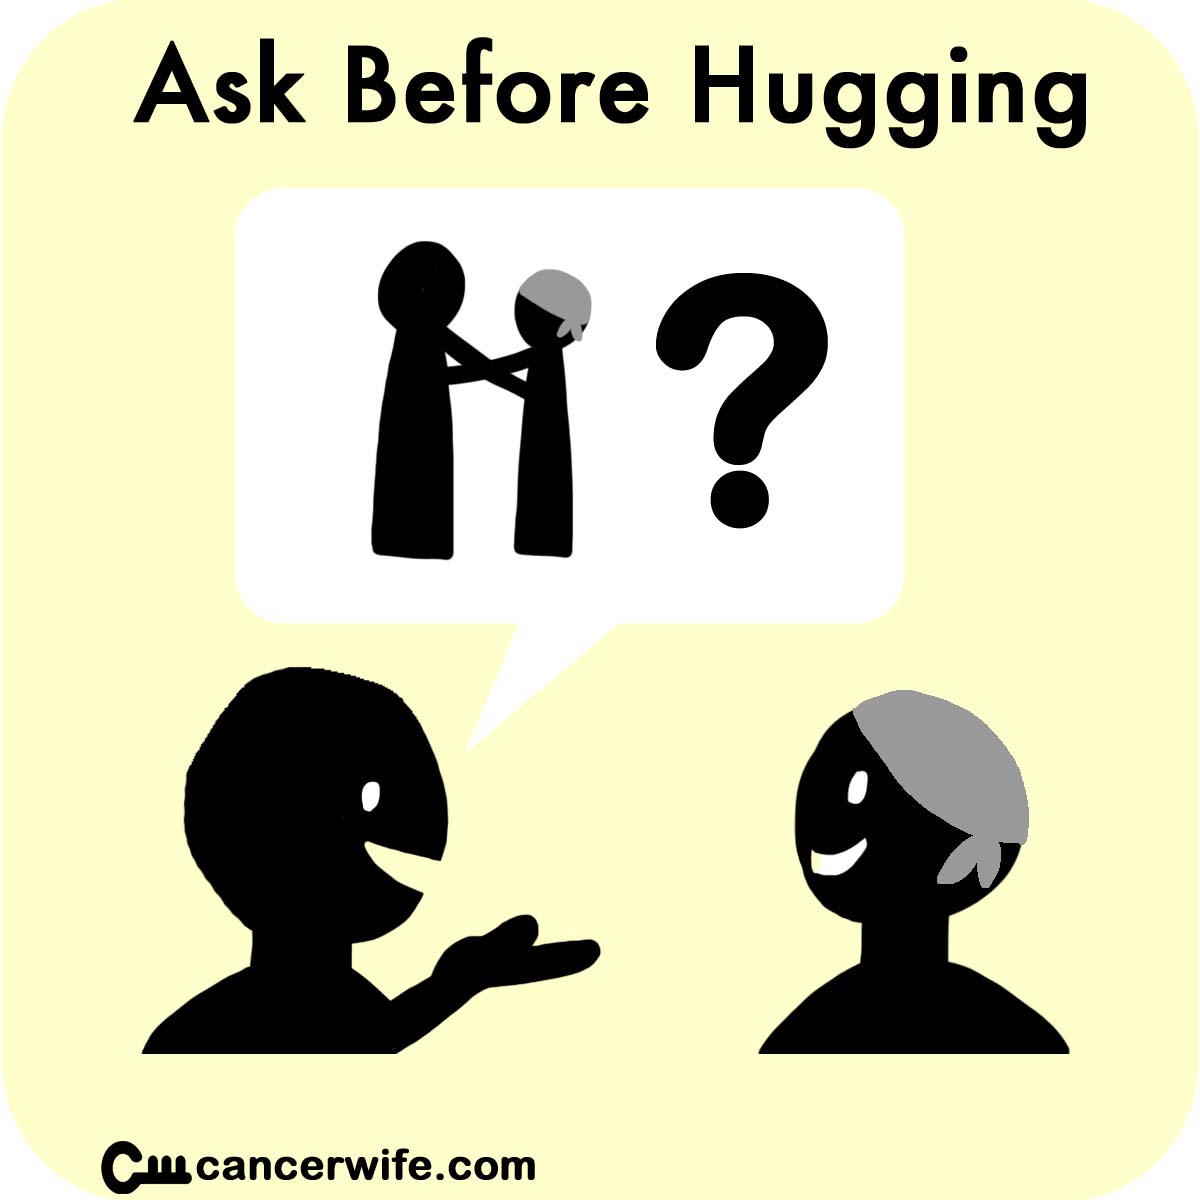 Tips for visiting cancer patients, ask before hugging